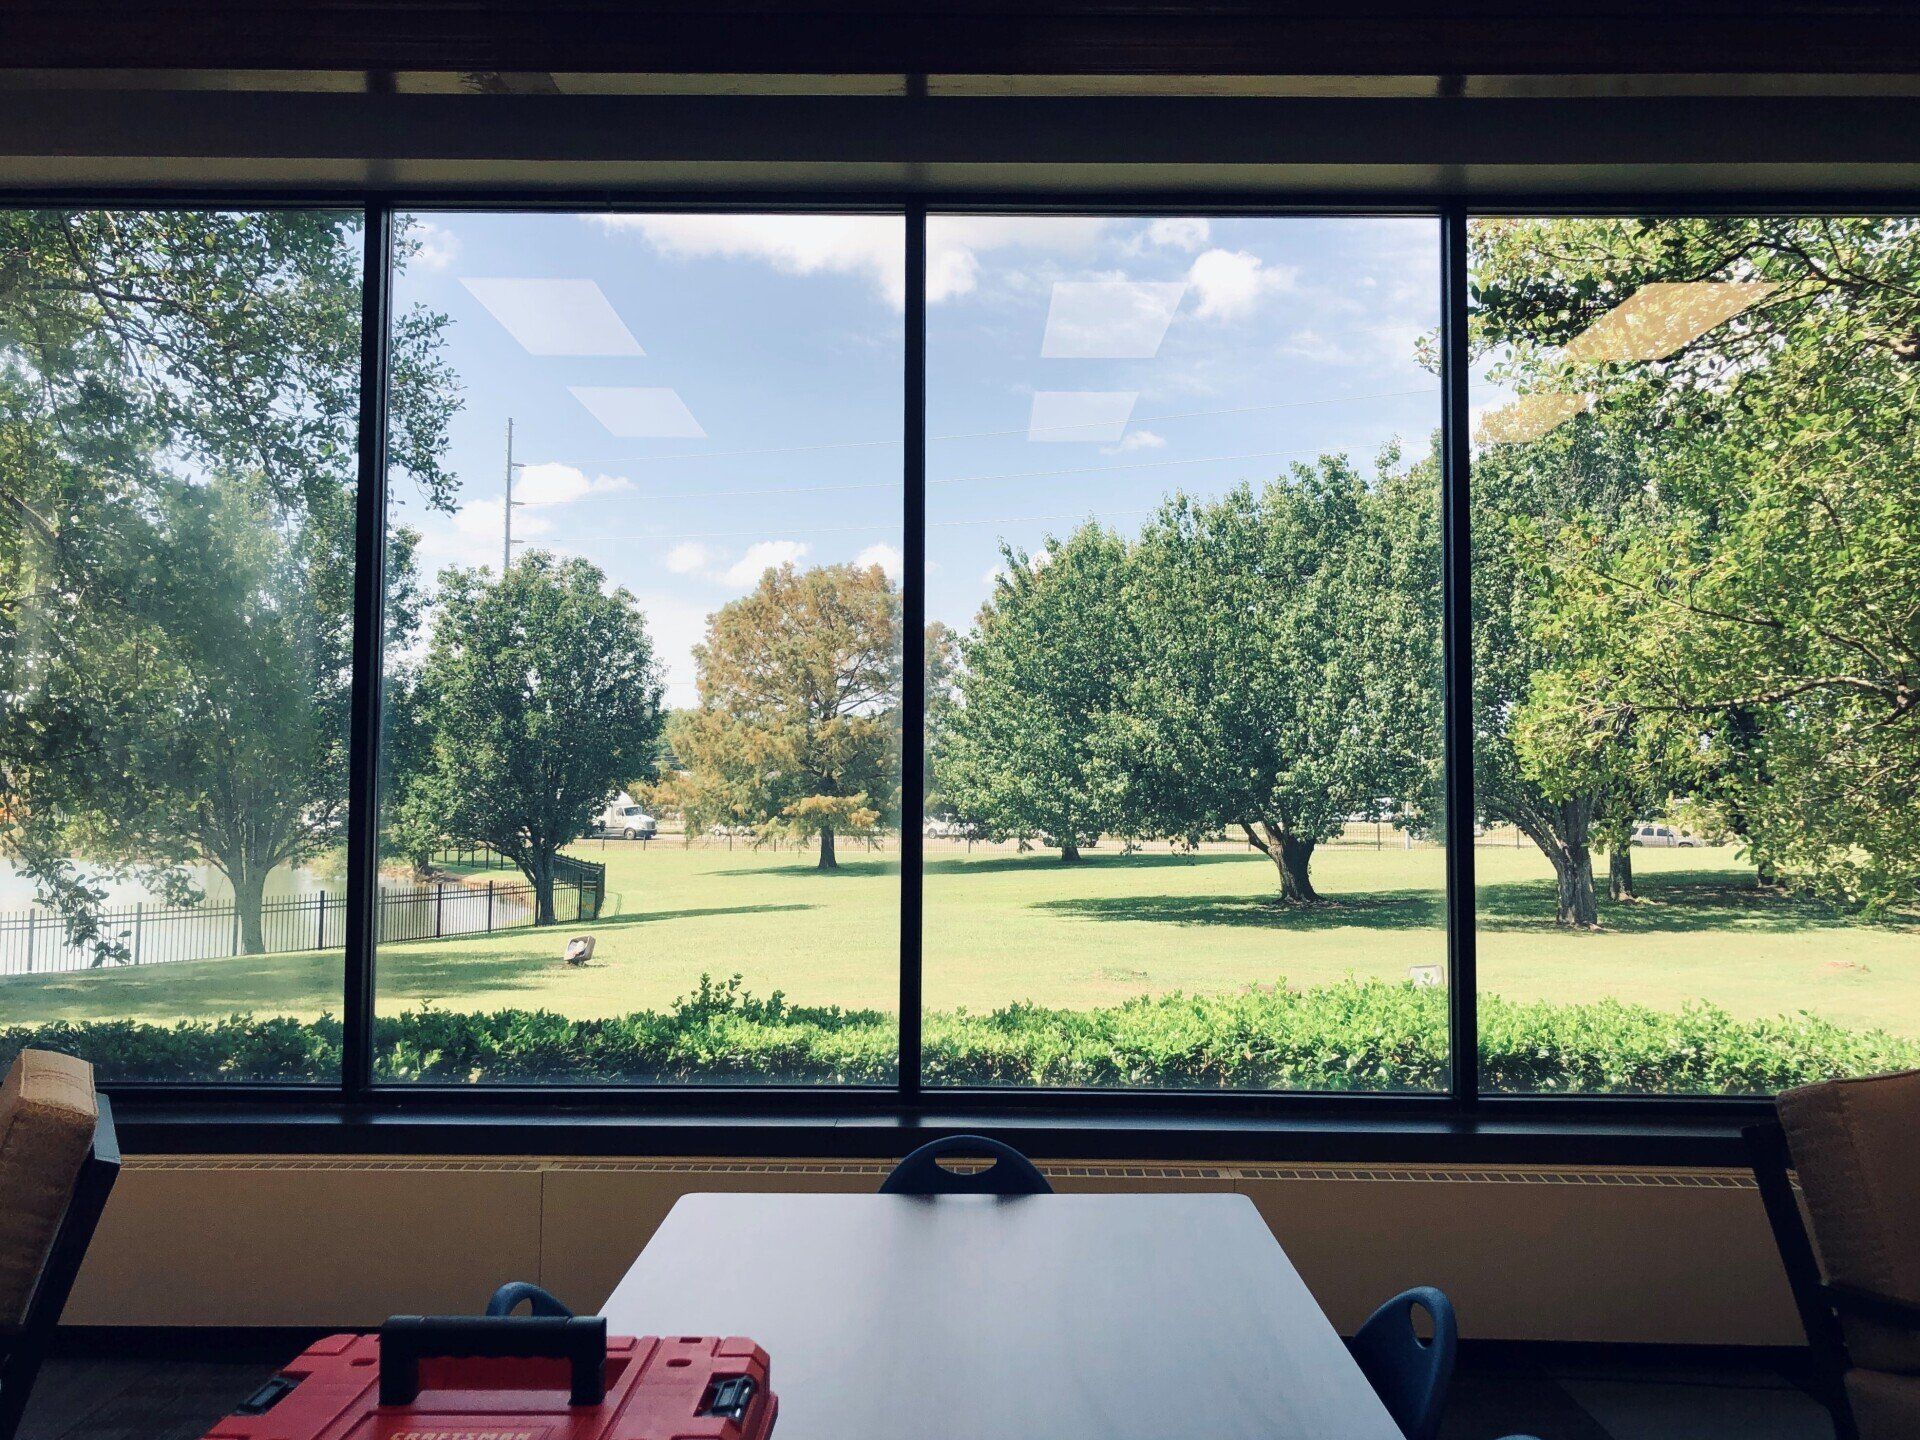 commercial tinting in Montgomery, AL - Before Over 92% Glare Distractions were eliminated allowing a great work flow for students at Lead Academy in Montgomery, AL.